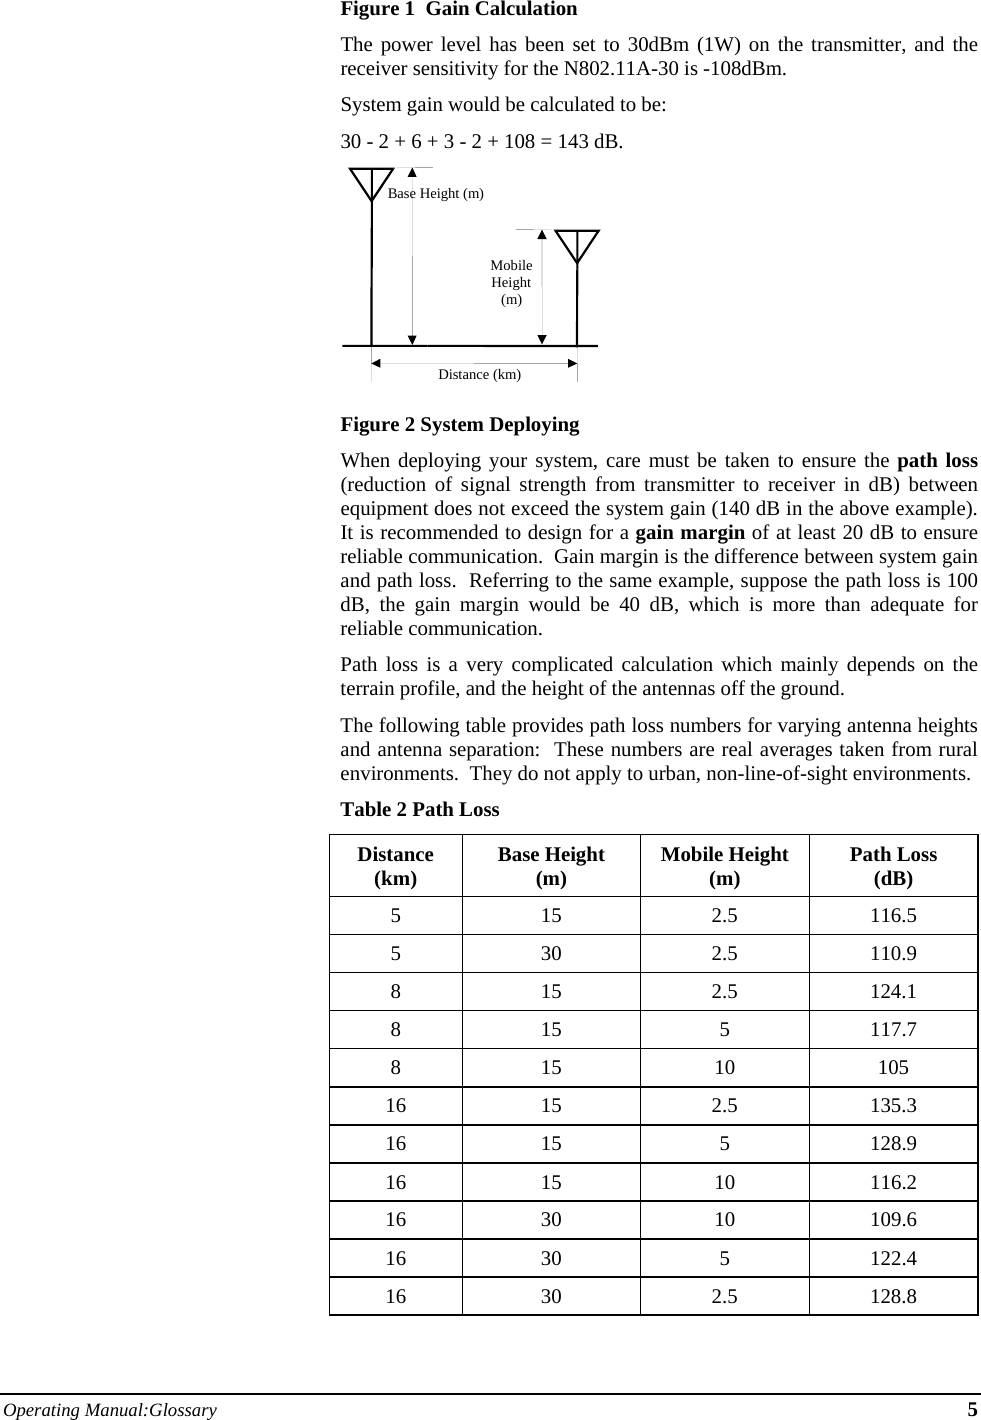 Operating Manual:Glossary 5   Figure 1  Gain Calculation The power level has been set to 30dBm (1W) on the transmitter, and the receiver sensitivity for the N802.11A-30 is -108dBm.   System gain would be calculated to be: 30 - 2 + 6 + 3 - 2 + 108 = 143 dB.  Figure 2 System Deploying When deploying your system, care must be taken to ensure the path loss (reduction of signal strength from transmitter to receiver in dB) between equipment does not exceed the system gain (140 dB in the above example).  It is recommended to design for a gain margin of at least 20 dB to ensure reliable communication.  Gain margin is the difference between system gain and path loss.  Referring to the same example, suppose the path loss is 100 dB, the gain margin would be 40 dB, which is more than adequate for reliable communication. Path loss is a very complicated calculation which mainly depends on the terrain profile, and the height of the antennas off the ground.  The following table provides path loss numbers for varying antenna heights and antenna separation:  These numbers are real averages taken from rural environments.  They do not apply to urban, non-line-of-sight environments. Table 2 Path Loss Distance (km)  Base Height (m)  Mobile Height (m)  Path Loss (dB) 5 15  2.5 116.5 5 30  2.5 110.9 8 15  2.5 124.1 8 15  5 117.7 8 15  10 105 16 15  2.5 135.3 16 15  5  128.9 16 15  10 116.2 16 30  10 109.6 16 30  5  122.4 16 30  2.5 128.8  Base Height (m)MobileHeight(m)Distance (km)